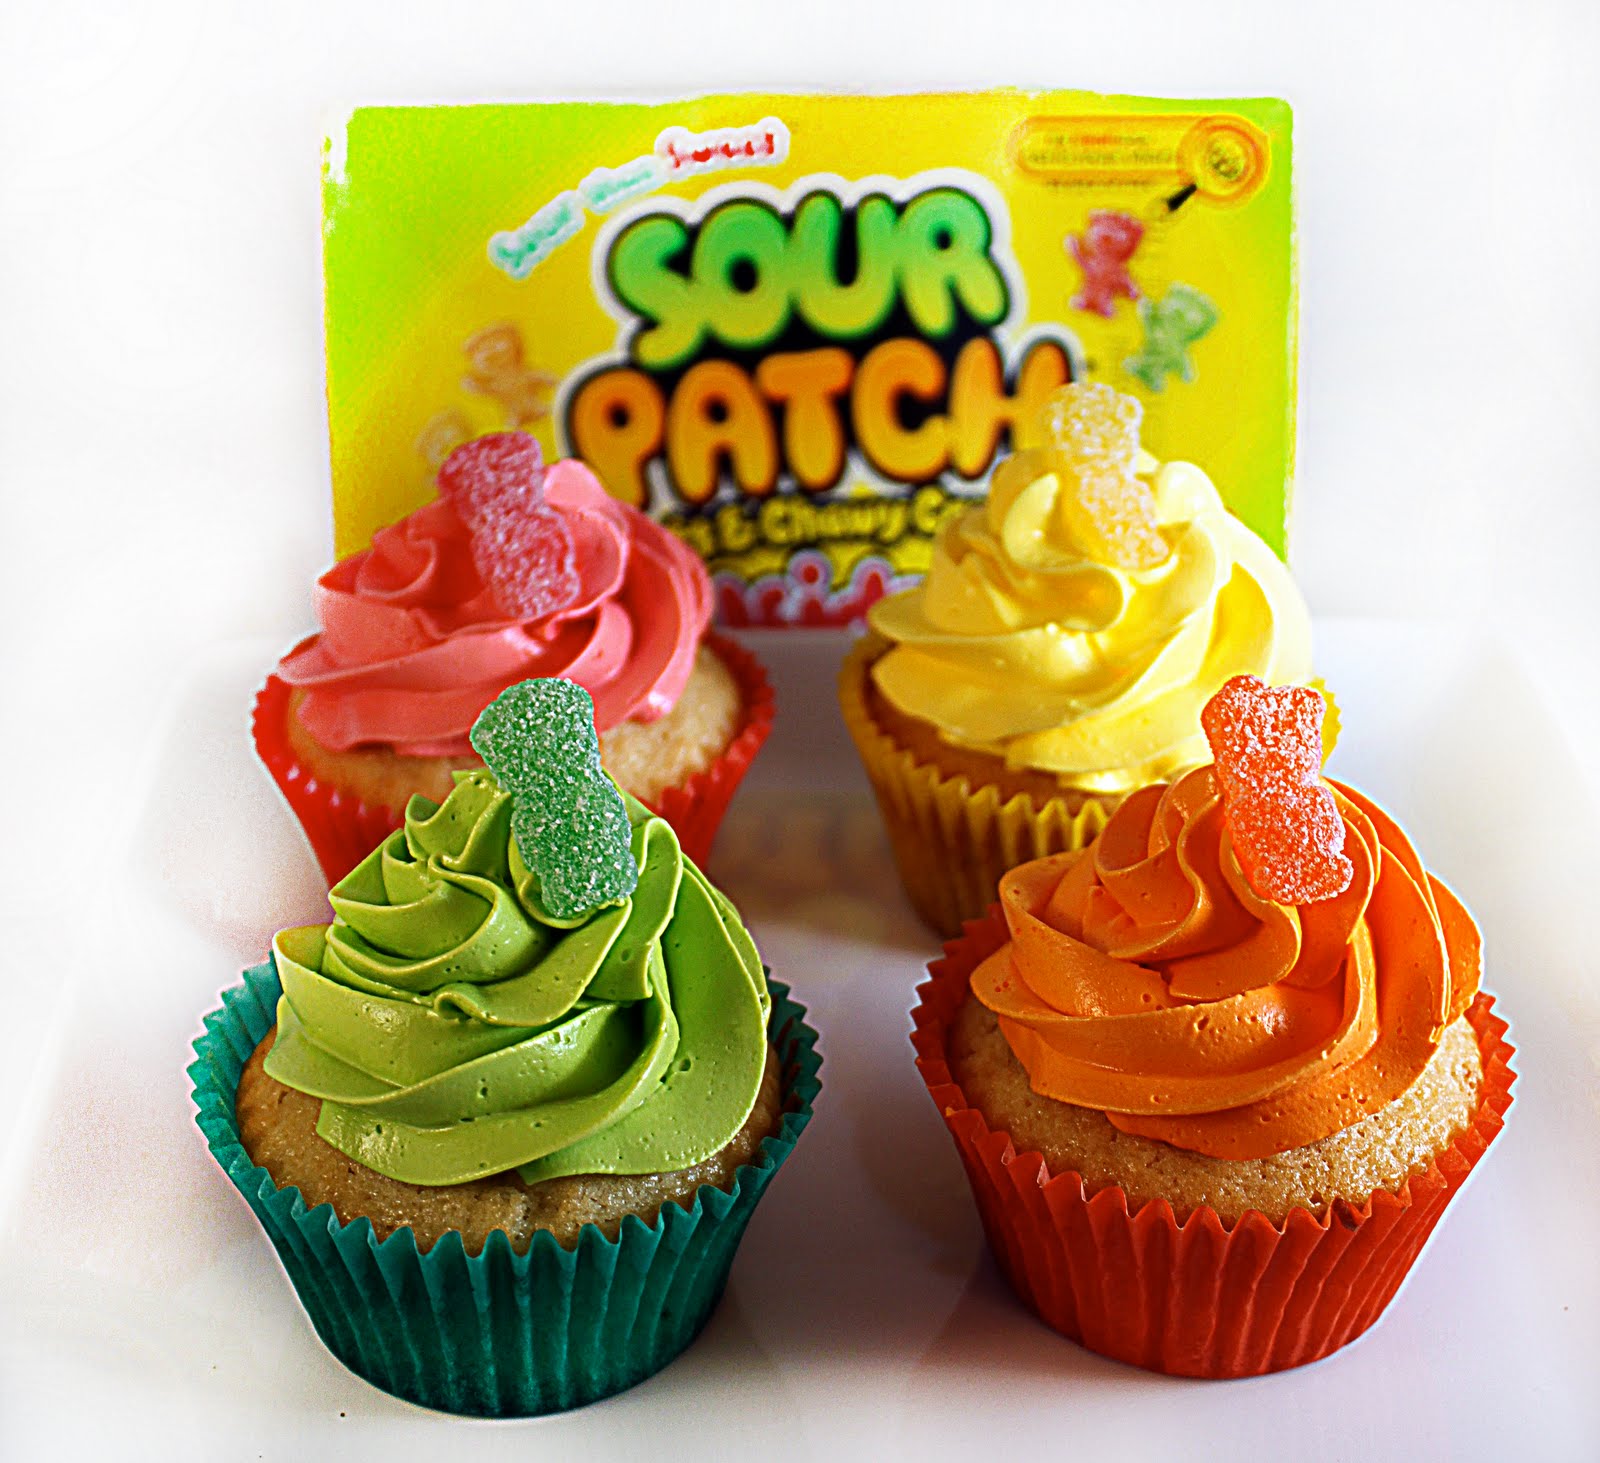 Ingredients of a 20something: Sour Patch Kids cupcakes